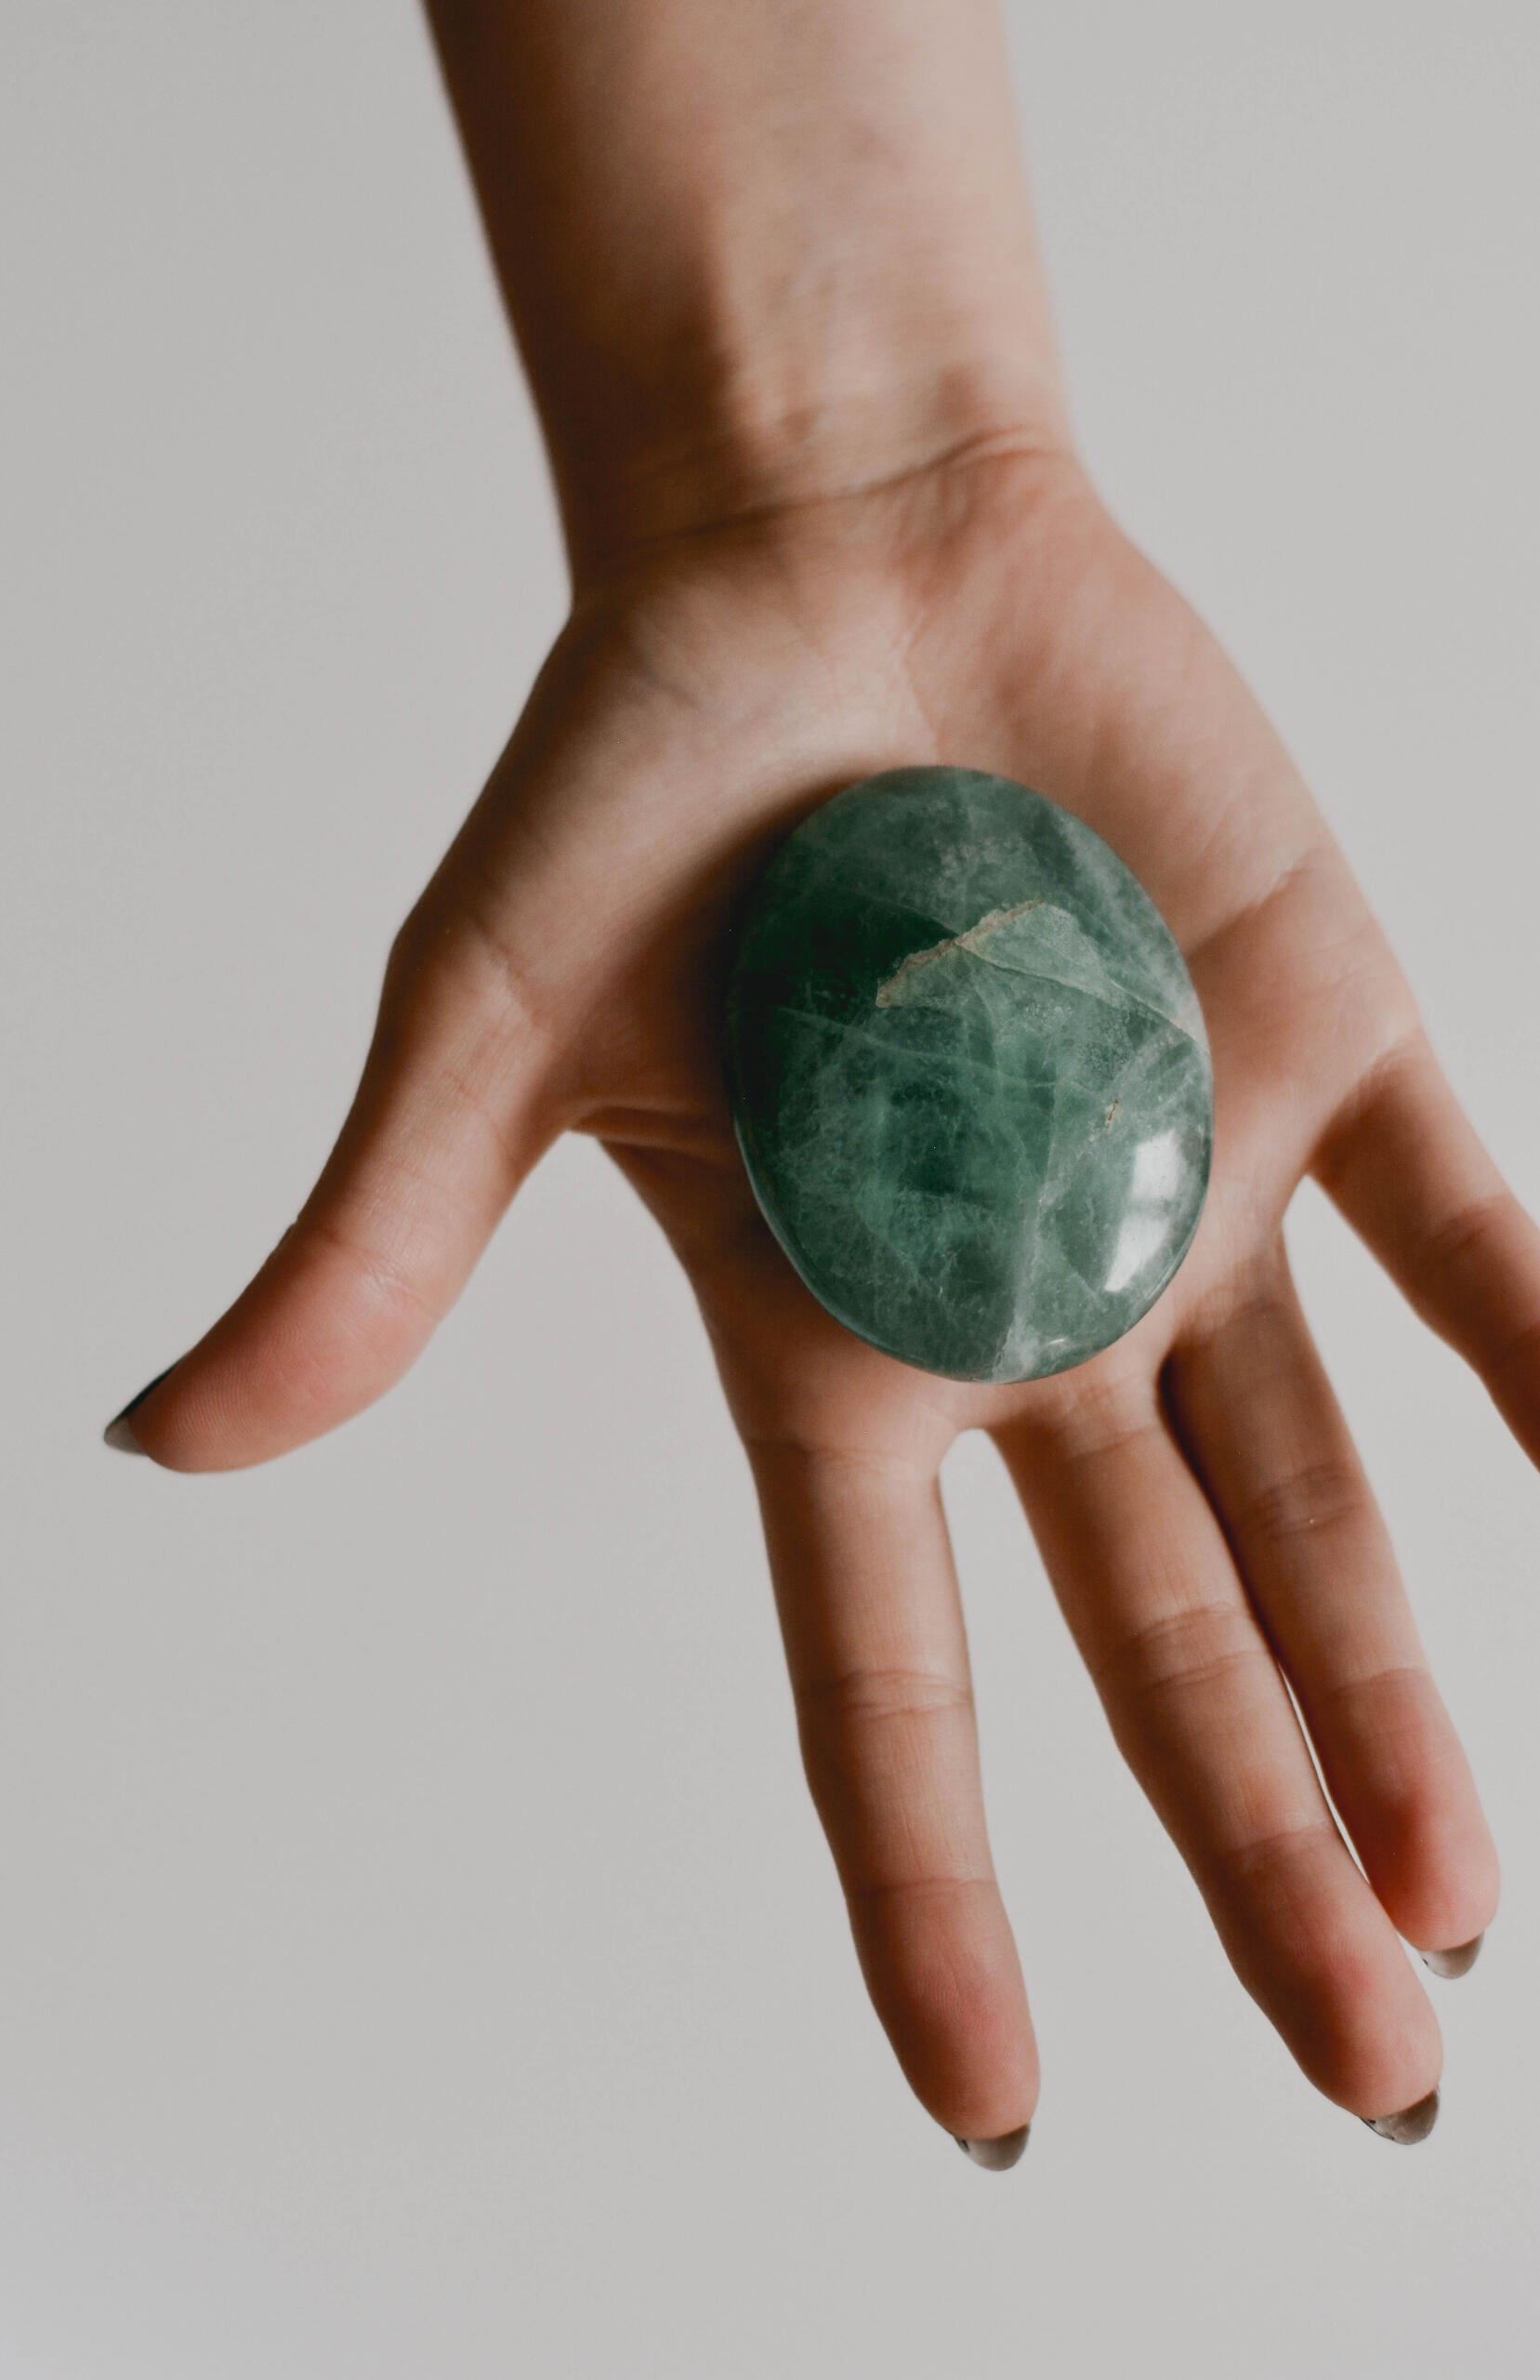 Image of a hand holding a Green Fluorite palmstone crystal